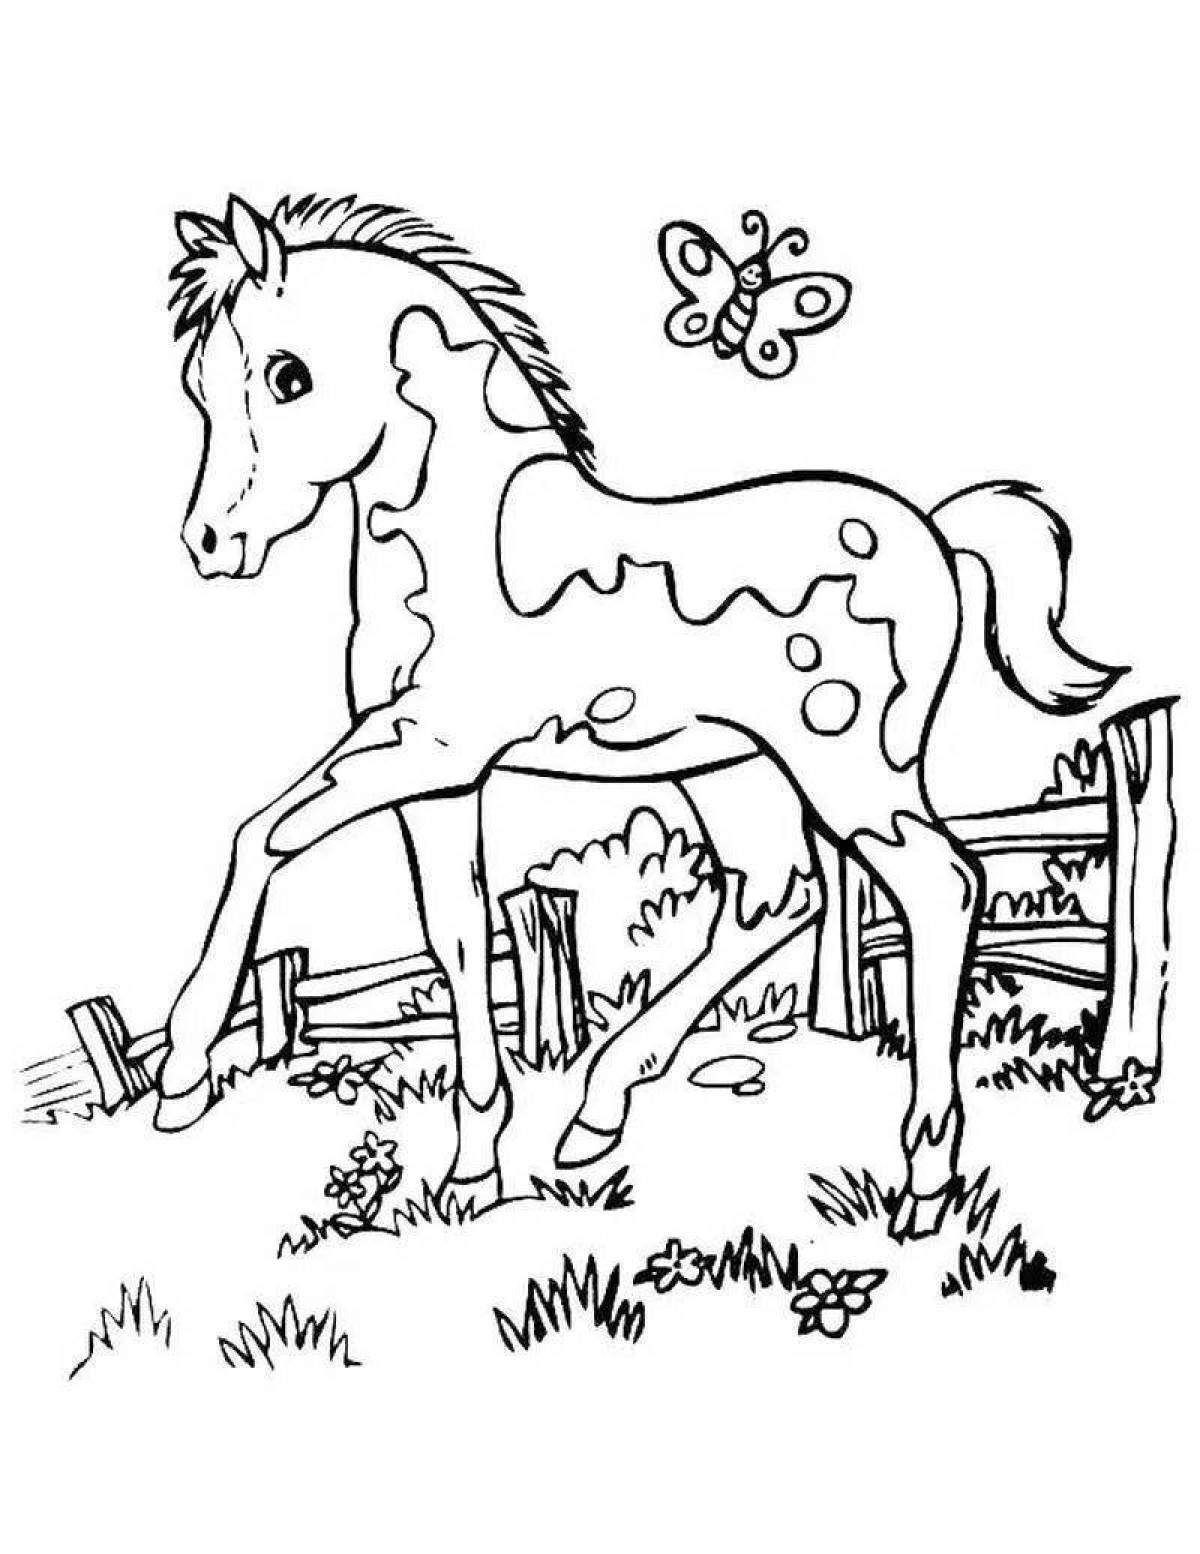 Violent coloring horse for children 6-7 years old